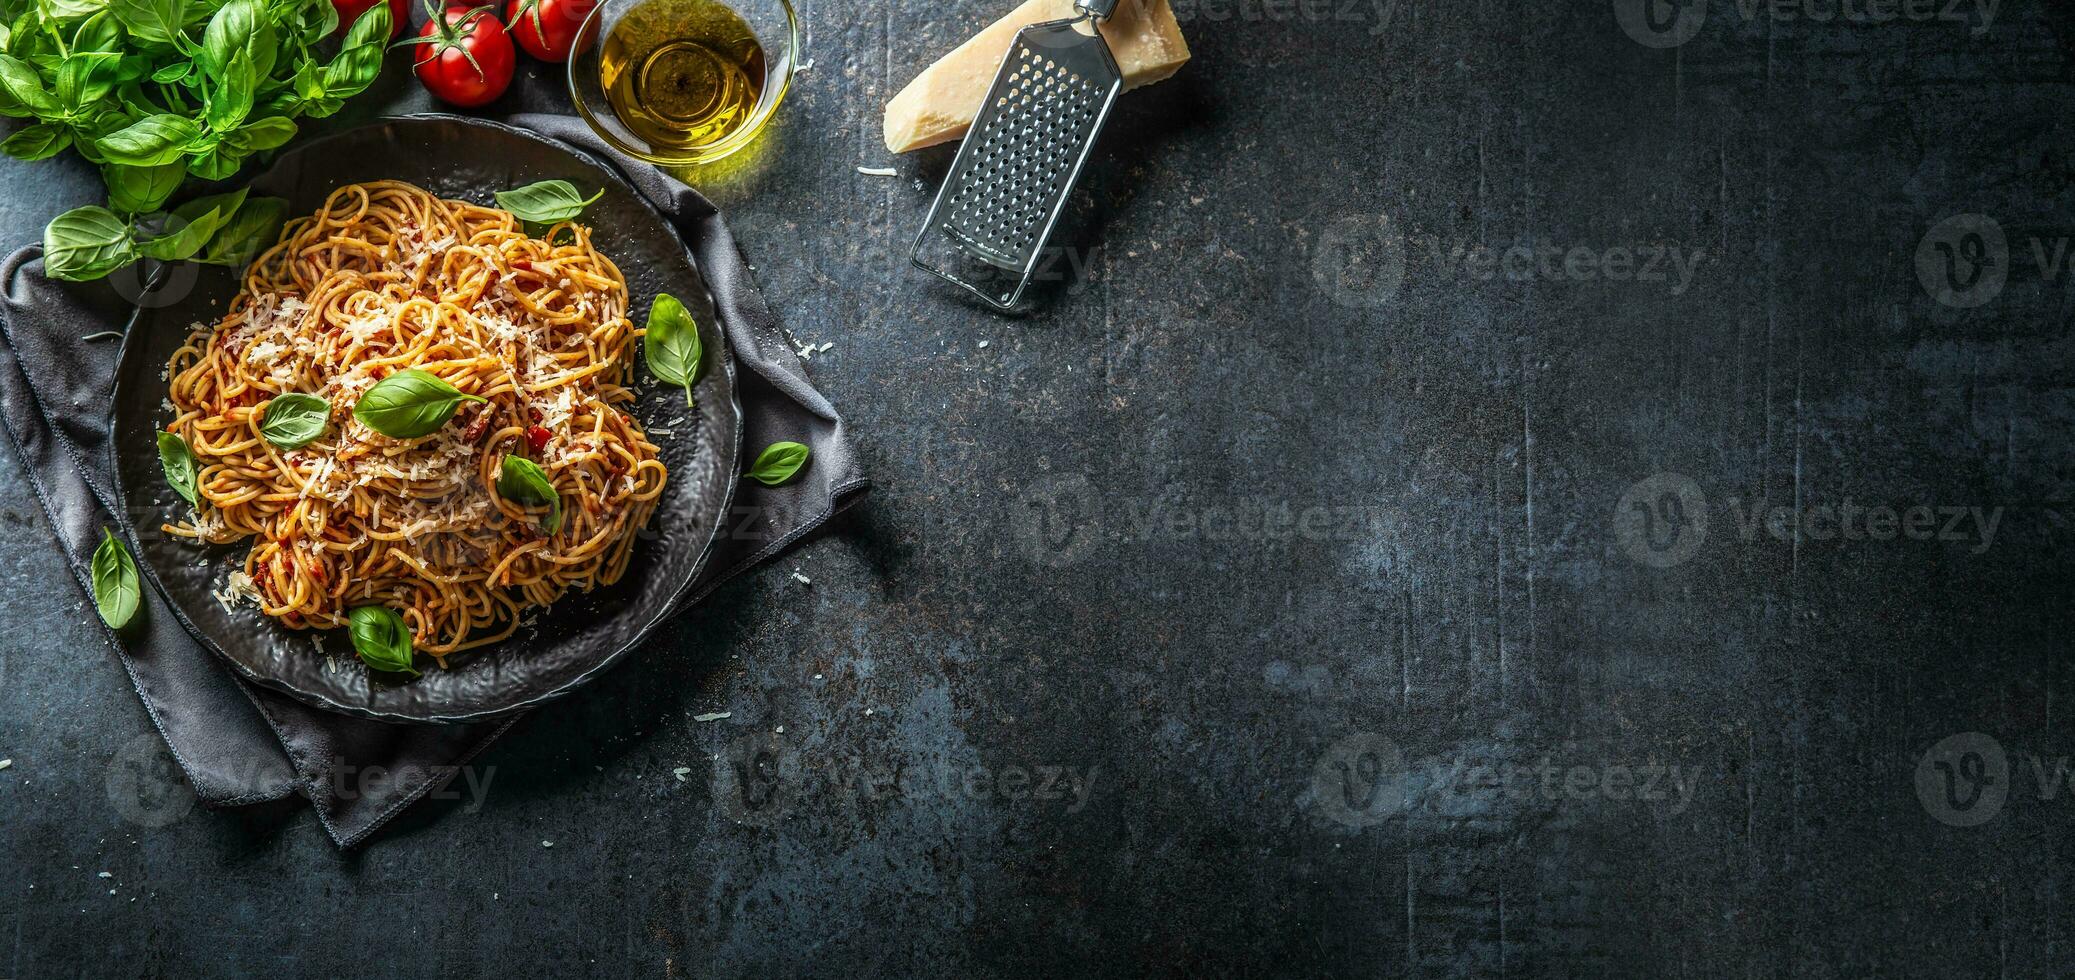 Pasta spaghetti toamto and bolognese sauce with oilve oil parmesan and basil photo